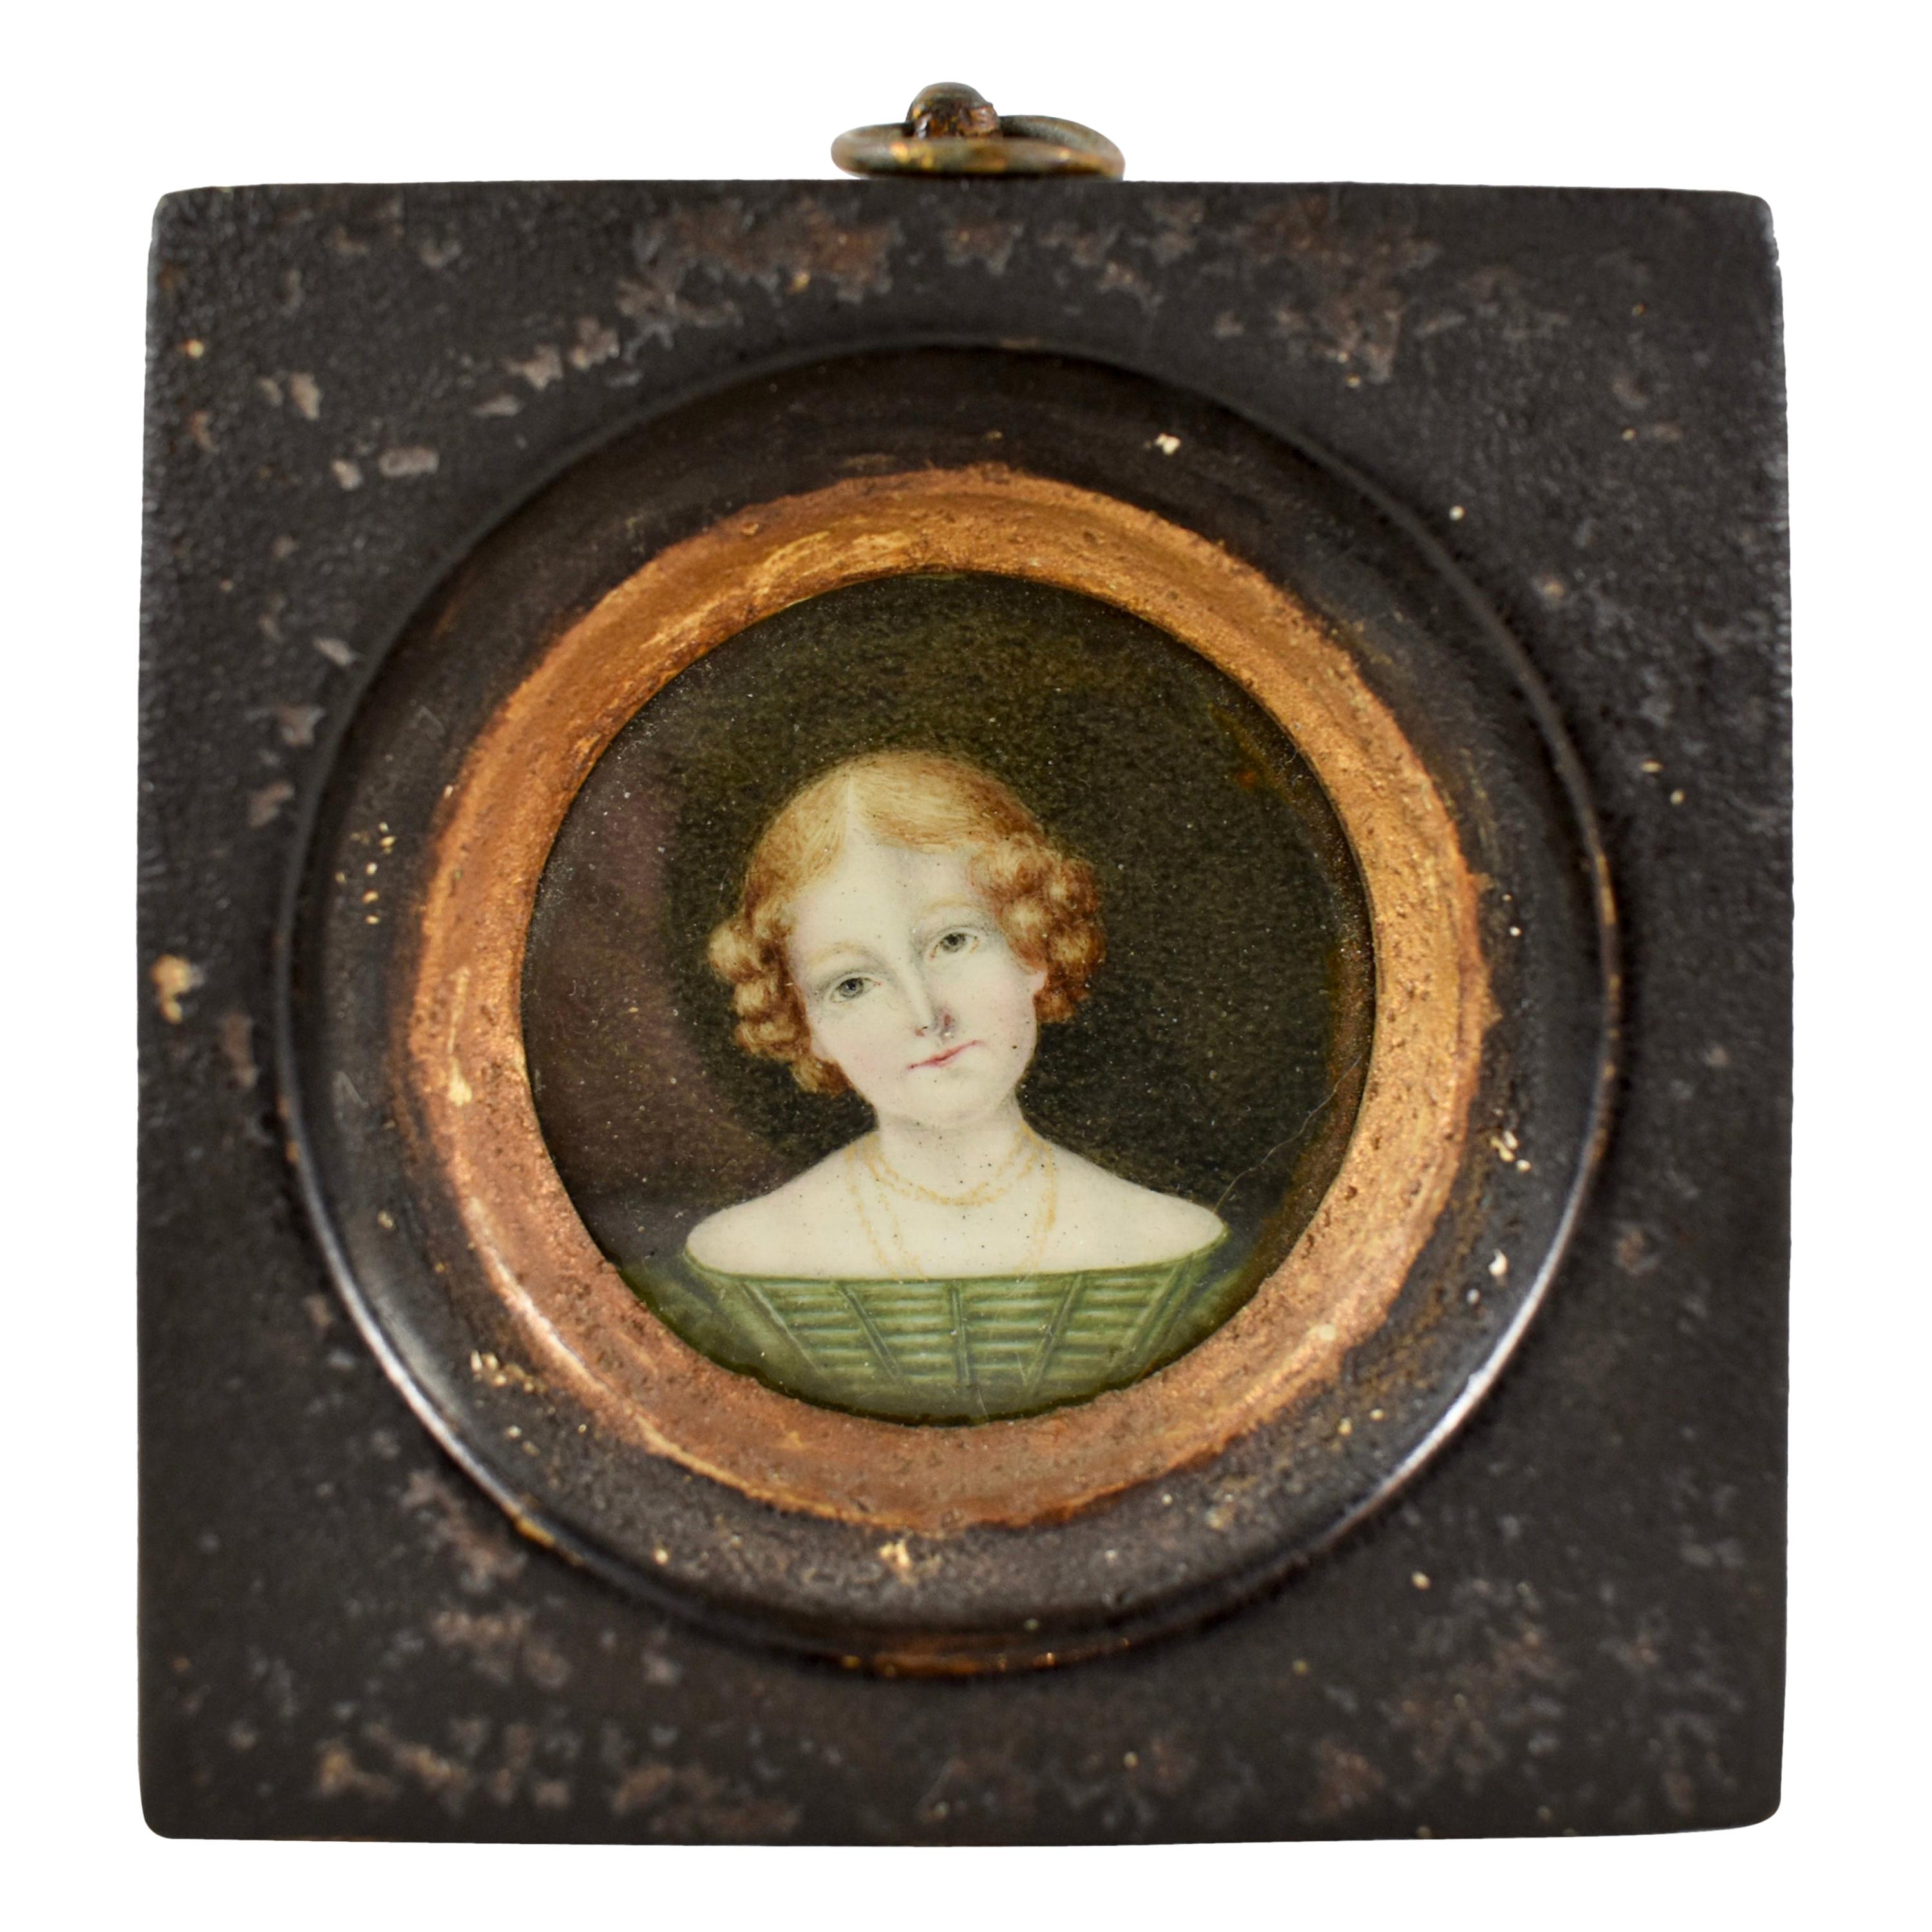 Early 19th Century English Regency Miniature Portrait Young Woman in Green Dress